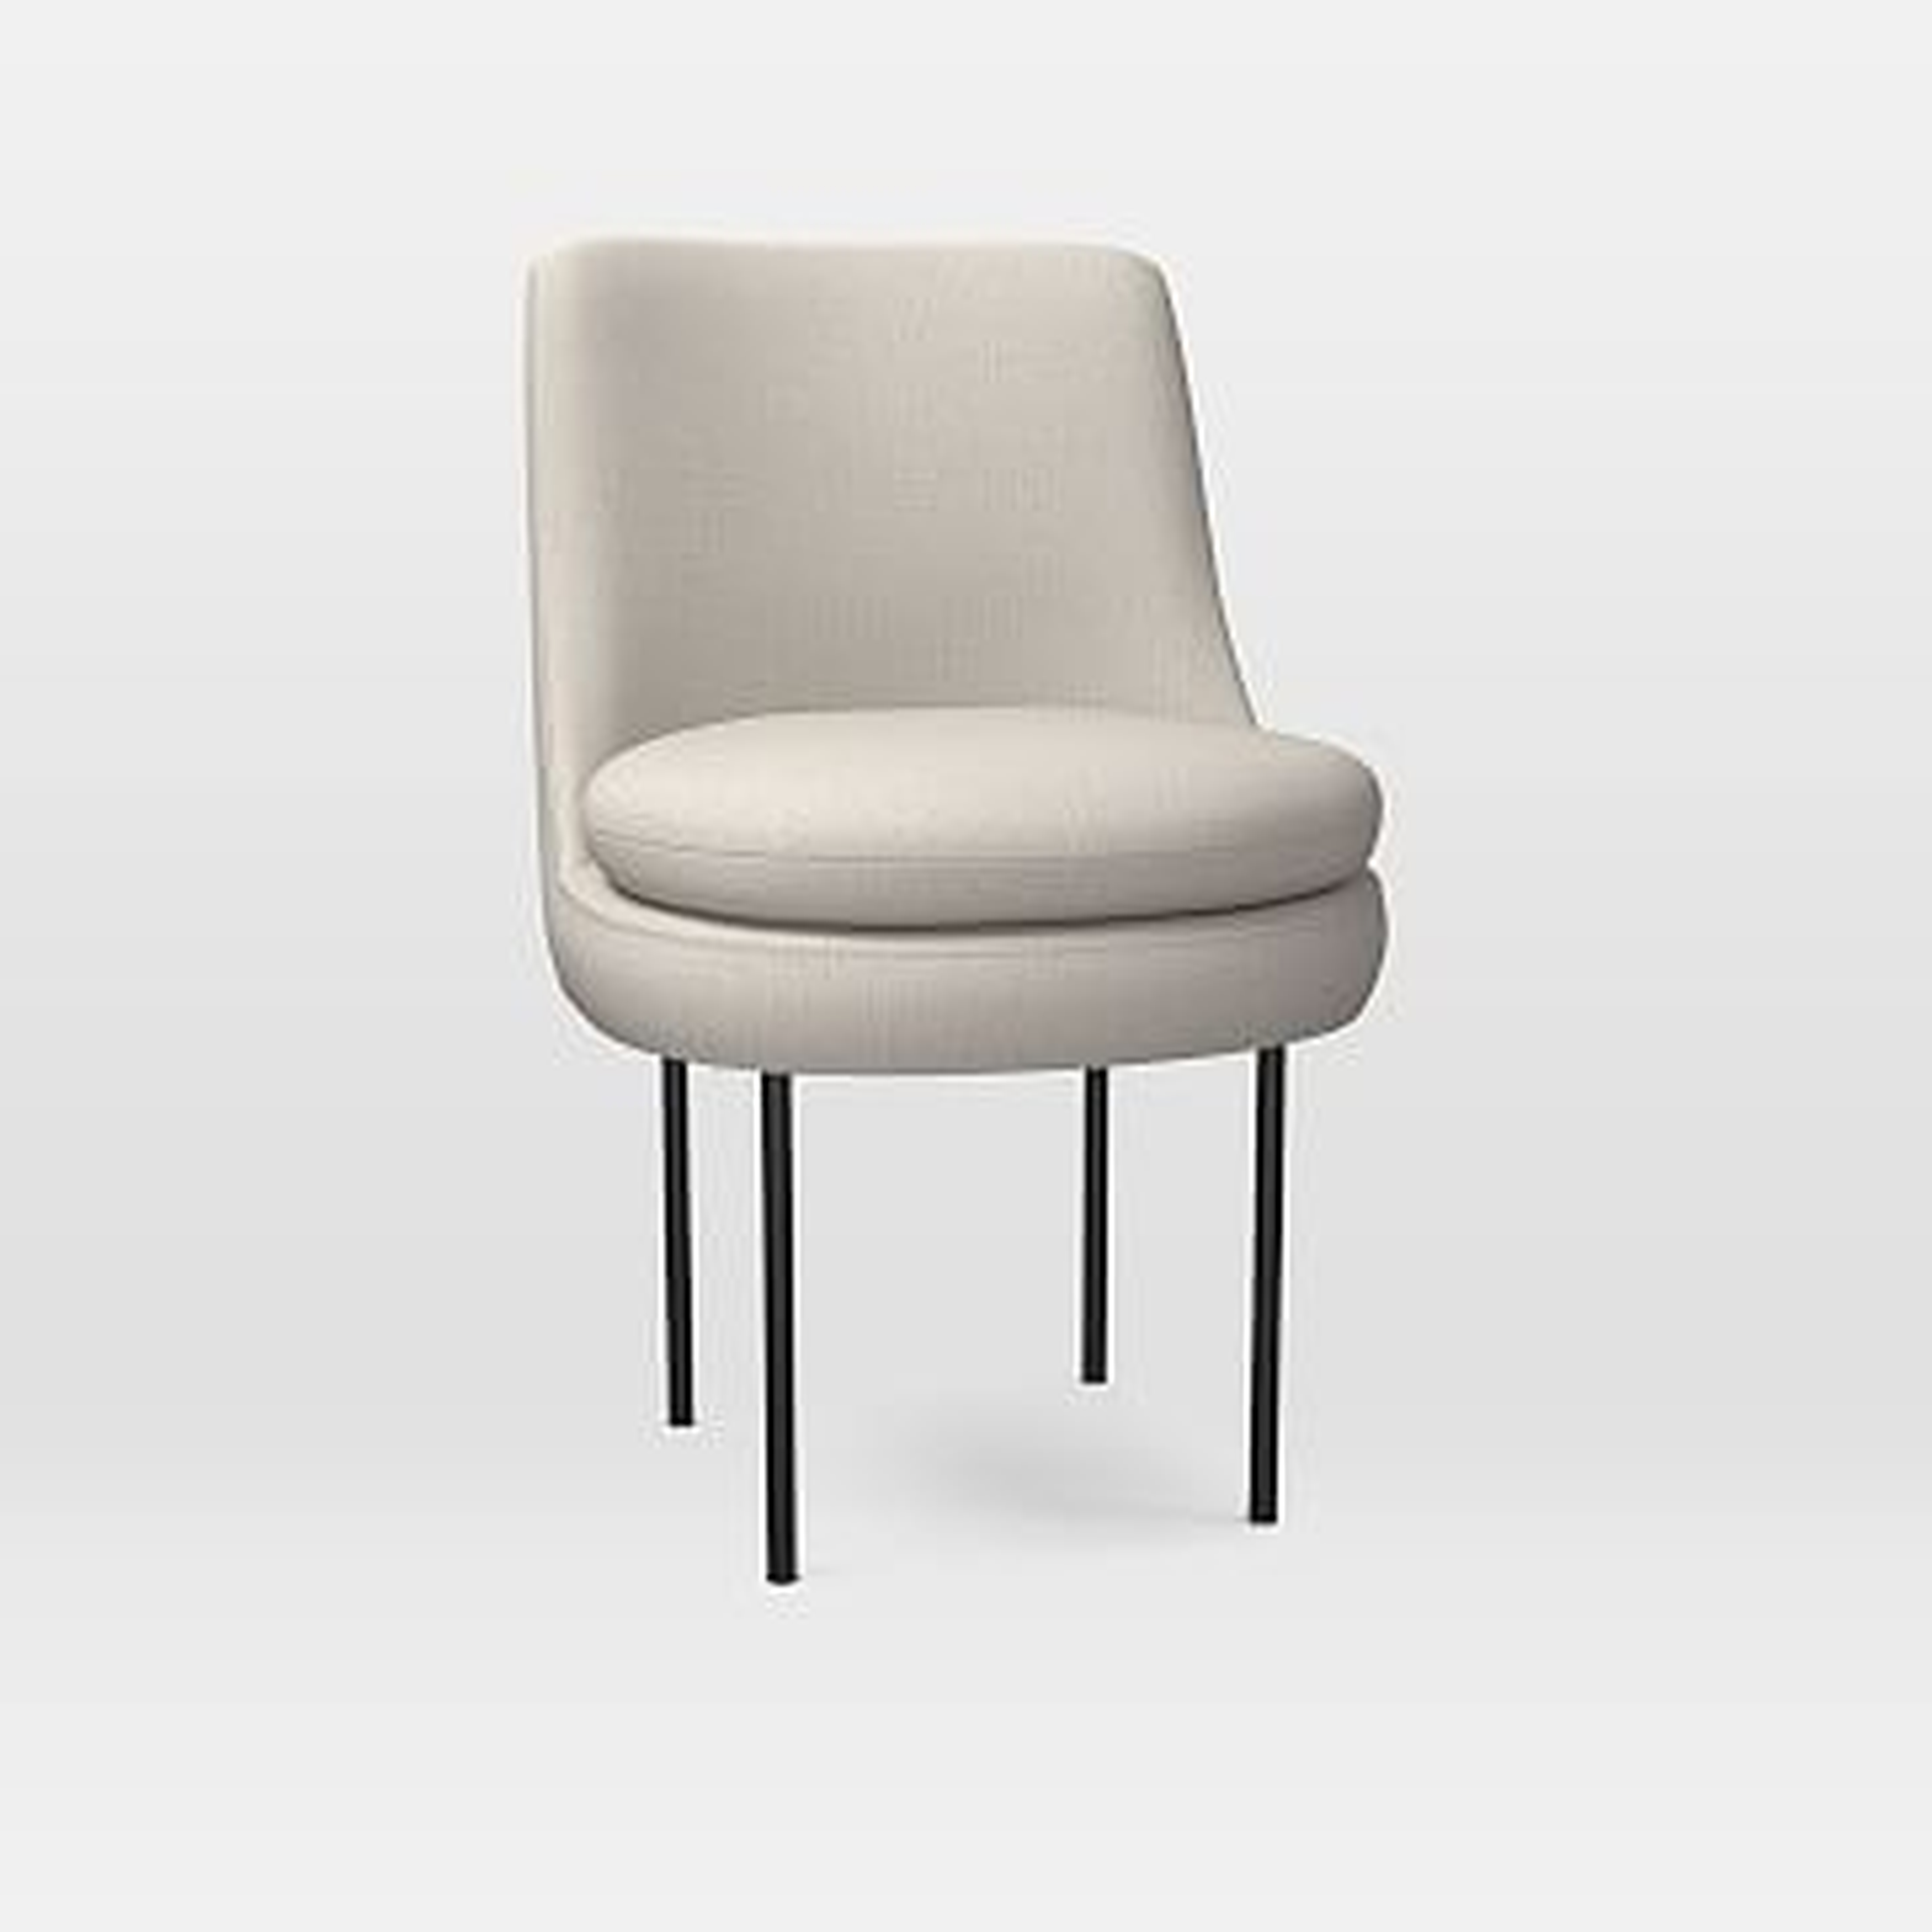 Modern Curved Dining Chair,Yarn Dyed Linen Weave,Alabaster,Black Pc - West Elm